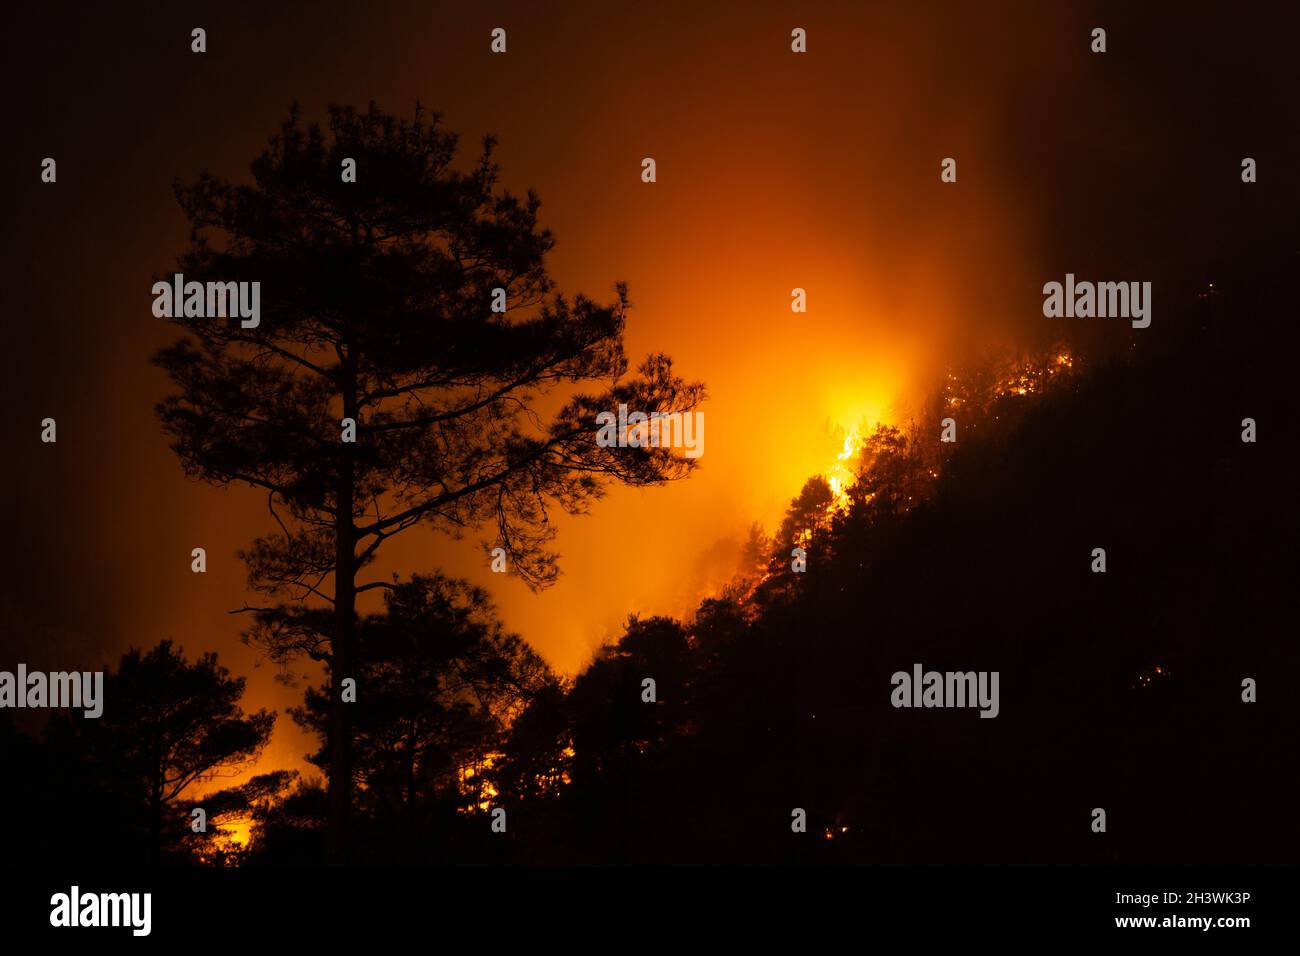 Night view of a forest fire in a steep rocky terrain. Flames, sparks and smoke rise to the sky. Silhouettes of pine trees are visible among the flames Stock Photo